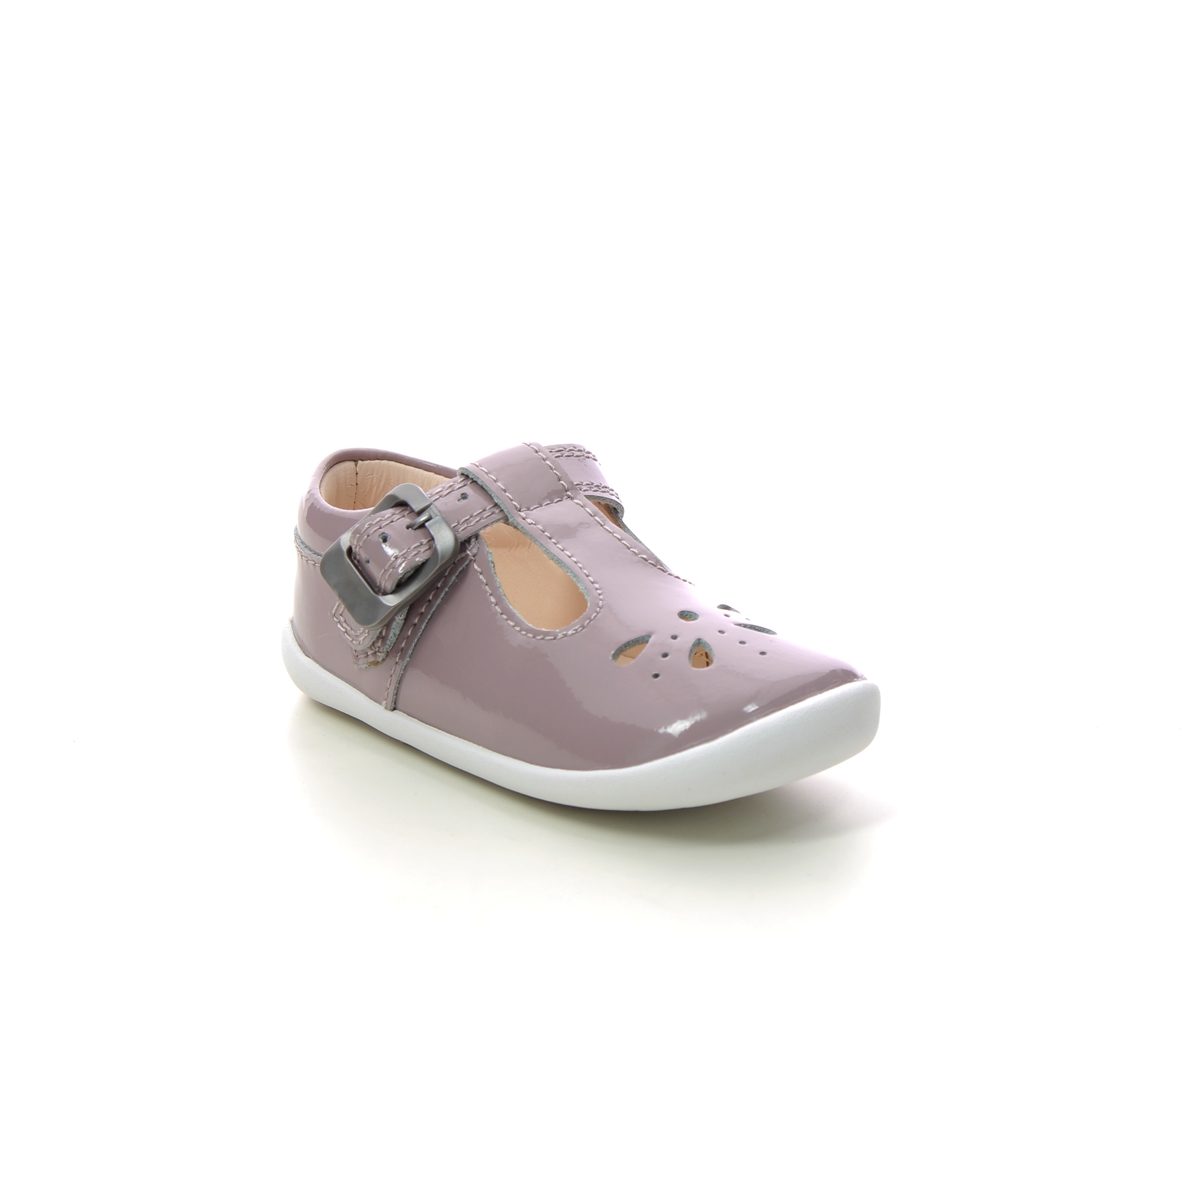 Clarks Roamer Star T Pink Kids girls first and baby shoes 4346-35E in a Plain Leather in Size 5